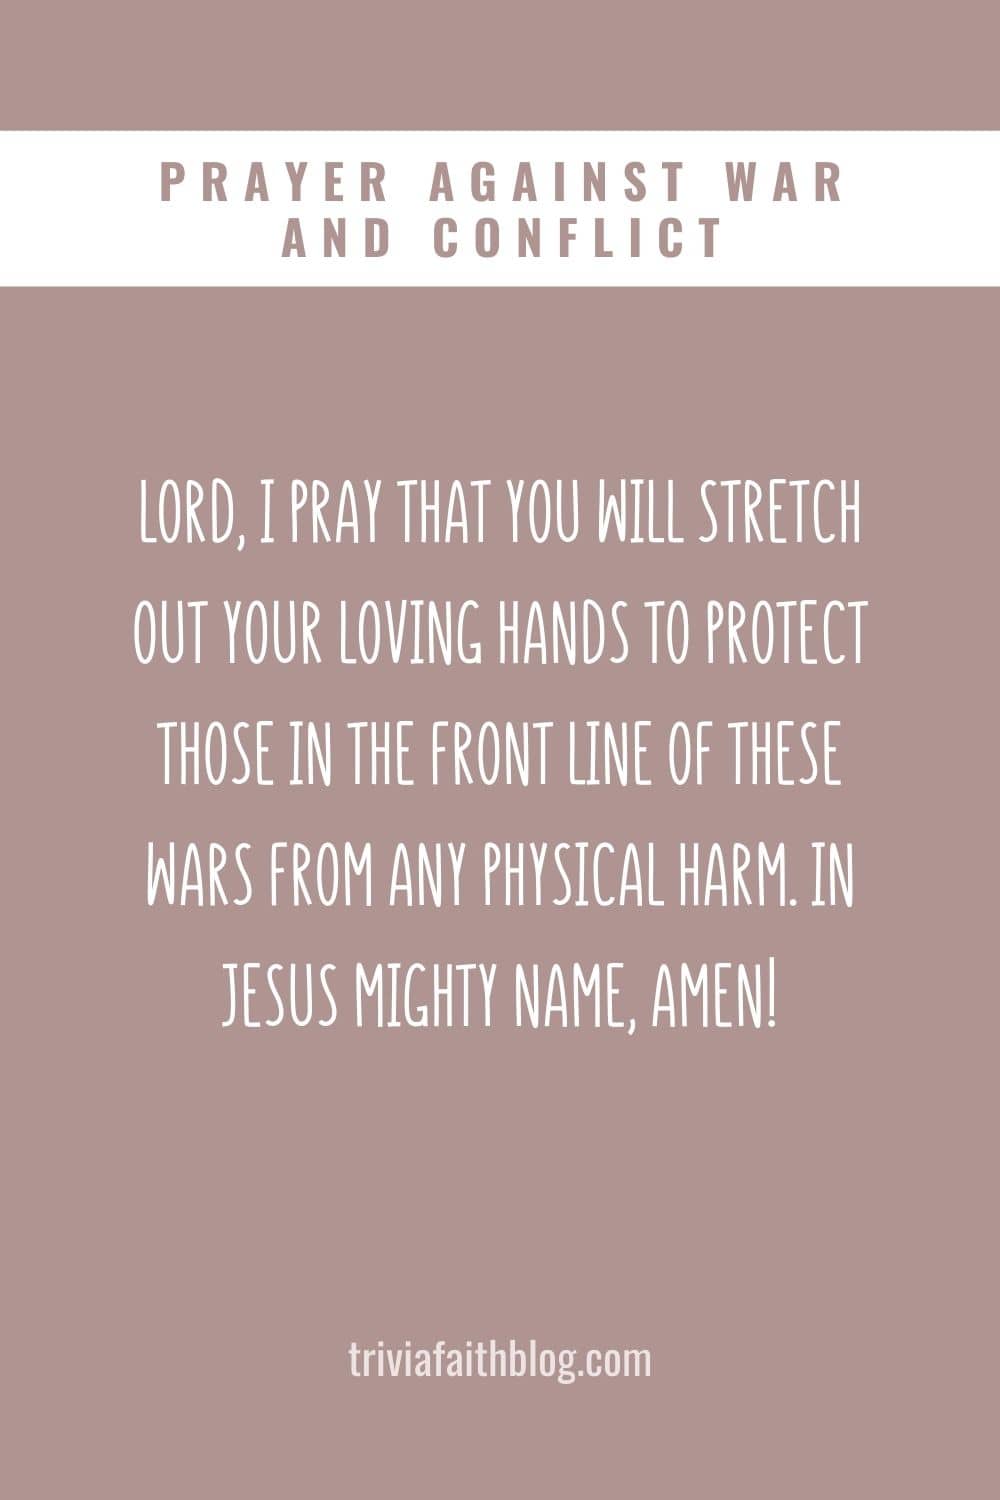 Prayer Against War and Conflict